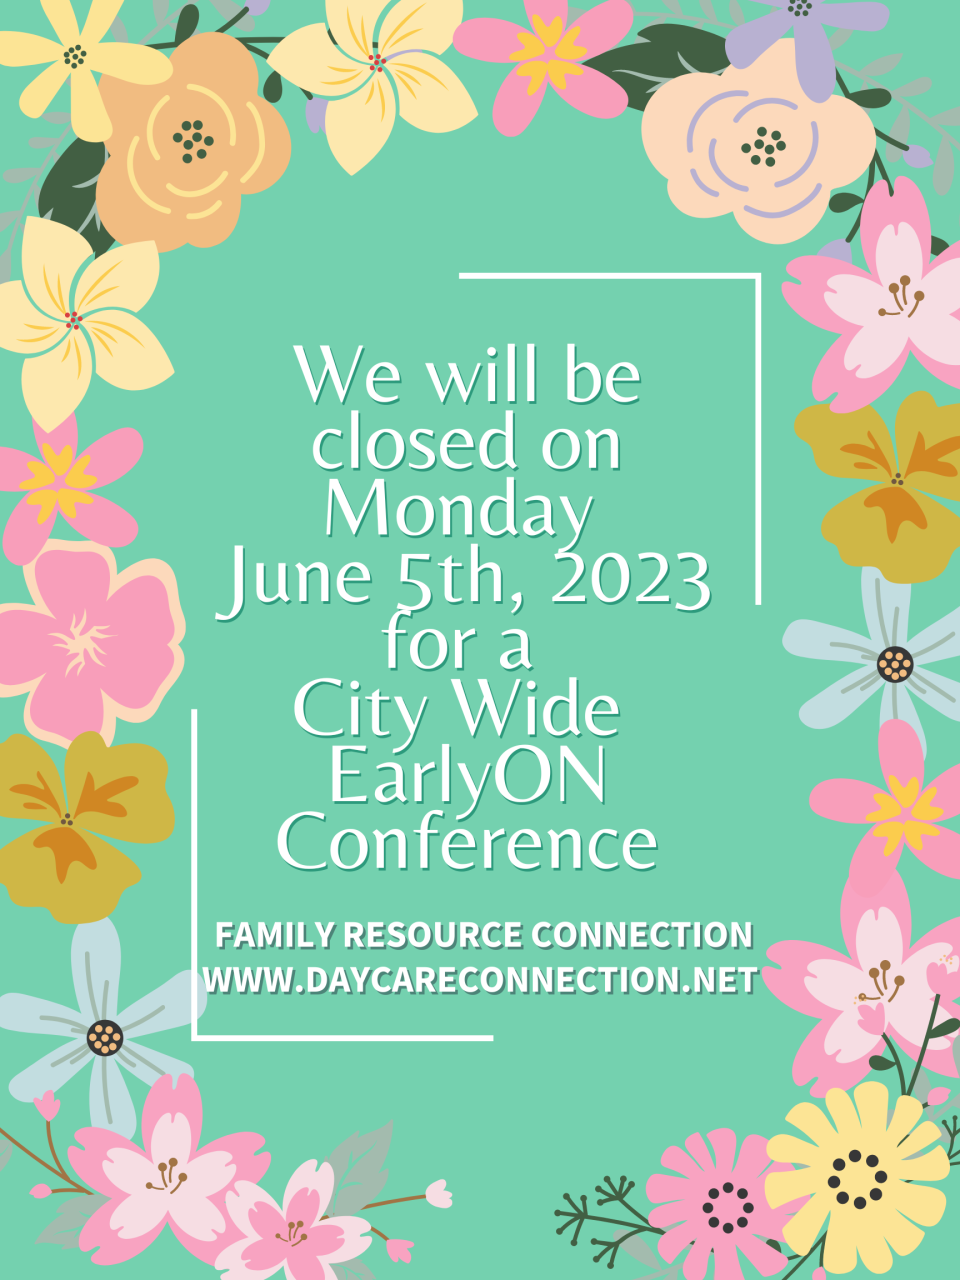 Family Resource Connection will be closed on Monday June 5th, 2023 for a City Wide EarlyON Conference.
www.daycareconnection.net